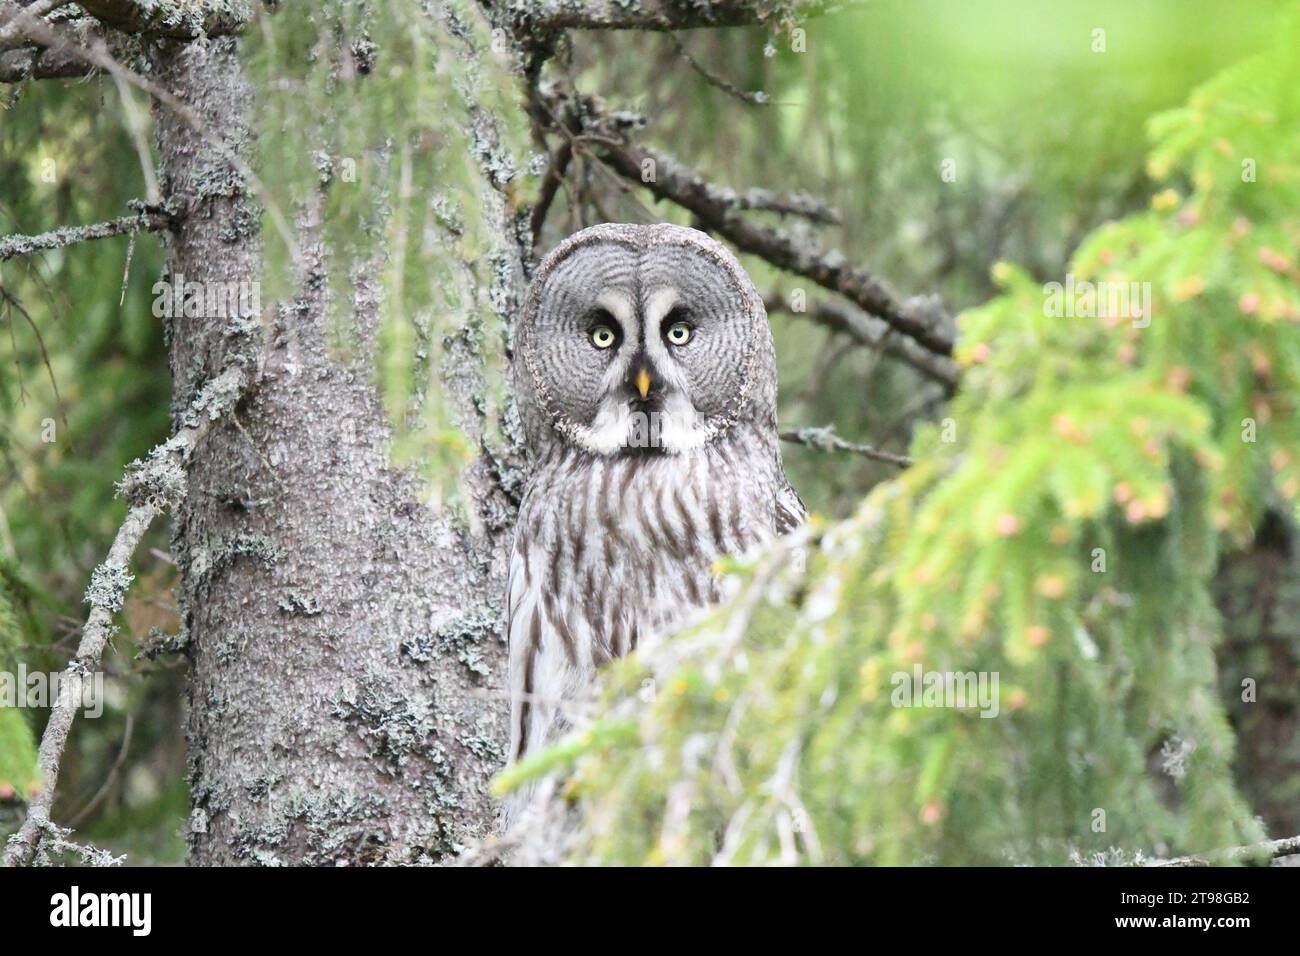 Great grey owl strix nebulosa relaxing and resting in a tree Stock Photo